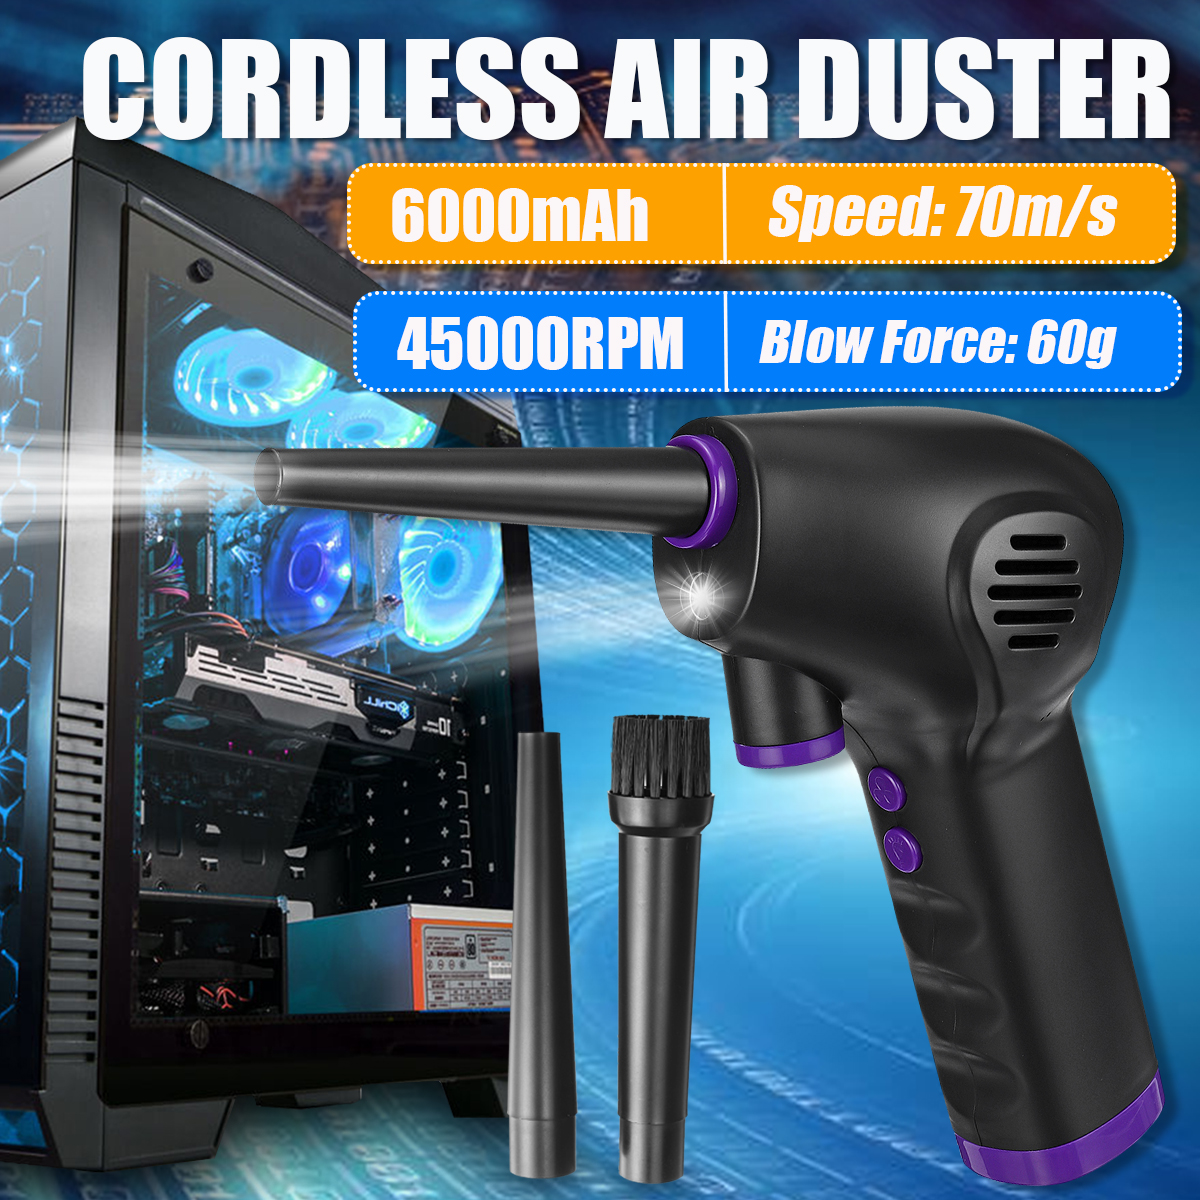 6000mAh-70ms-Cordless-Air-Duster-For-Computer-Cleaning-Replaces-Compressed-Spray-Gas-Cans-Rechargeab-1902465-3